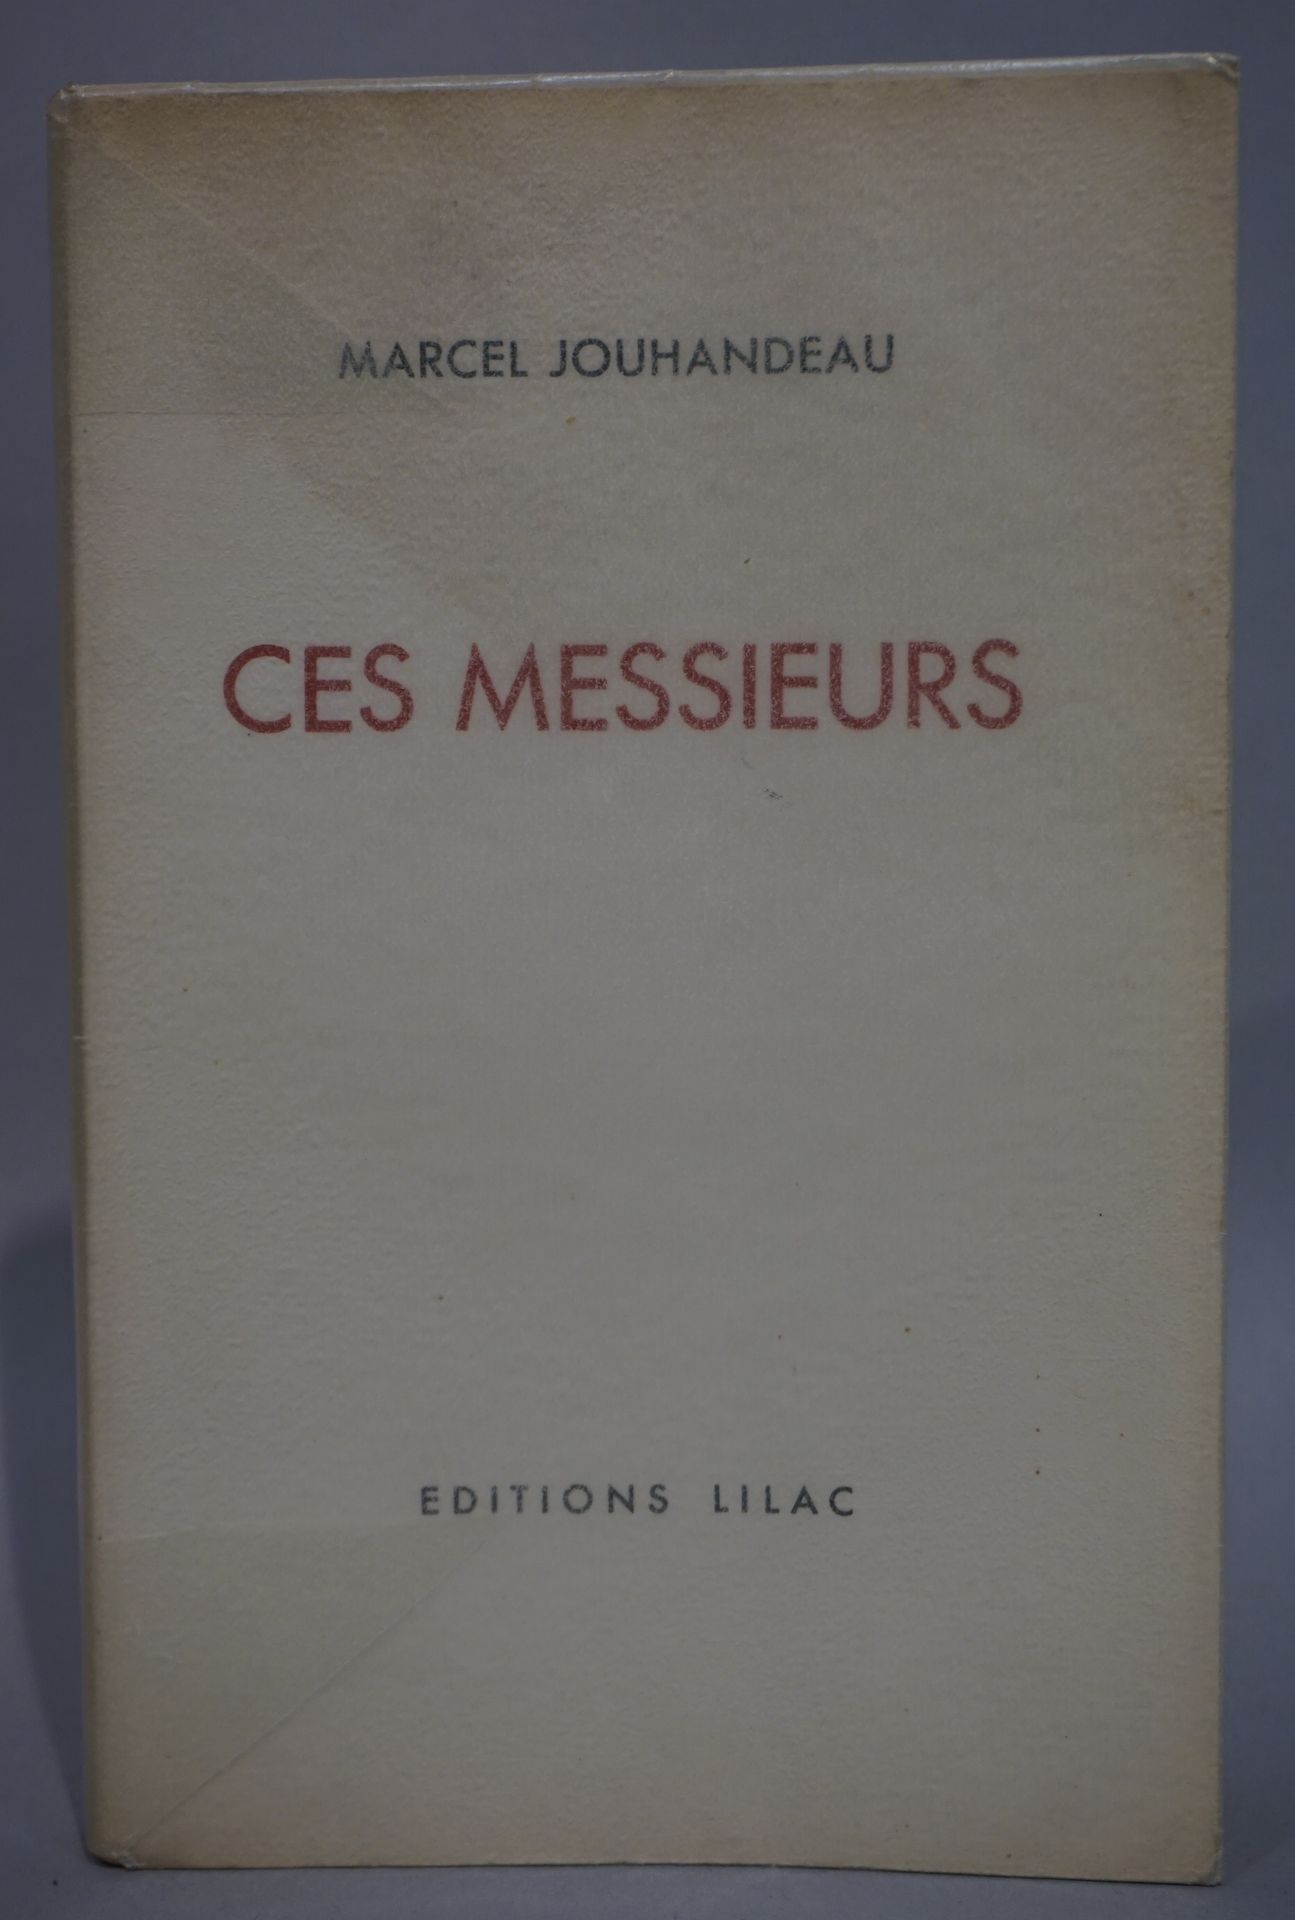 Null JOUHANDEAU（马塞尔）。Ces messieurs.S.D., Lilac, 1951, in-12, br. Cover, ORIGINAL&hellip;